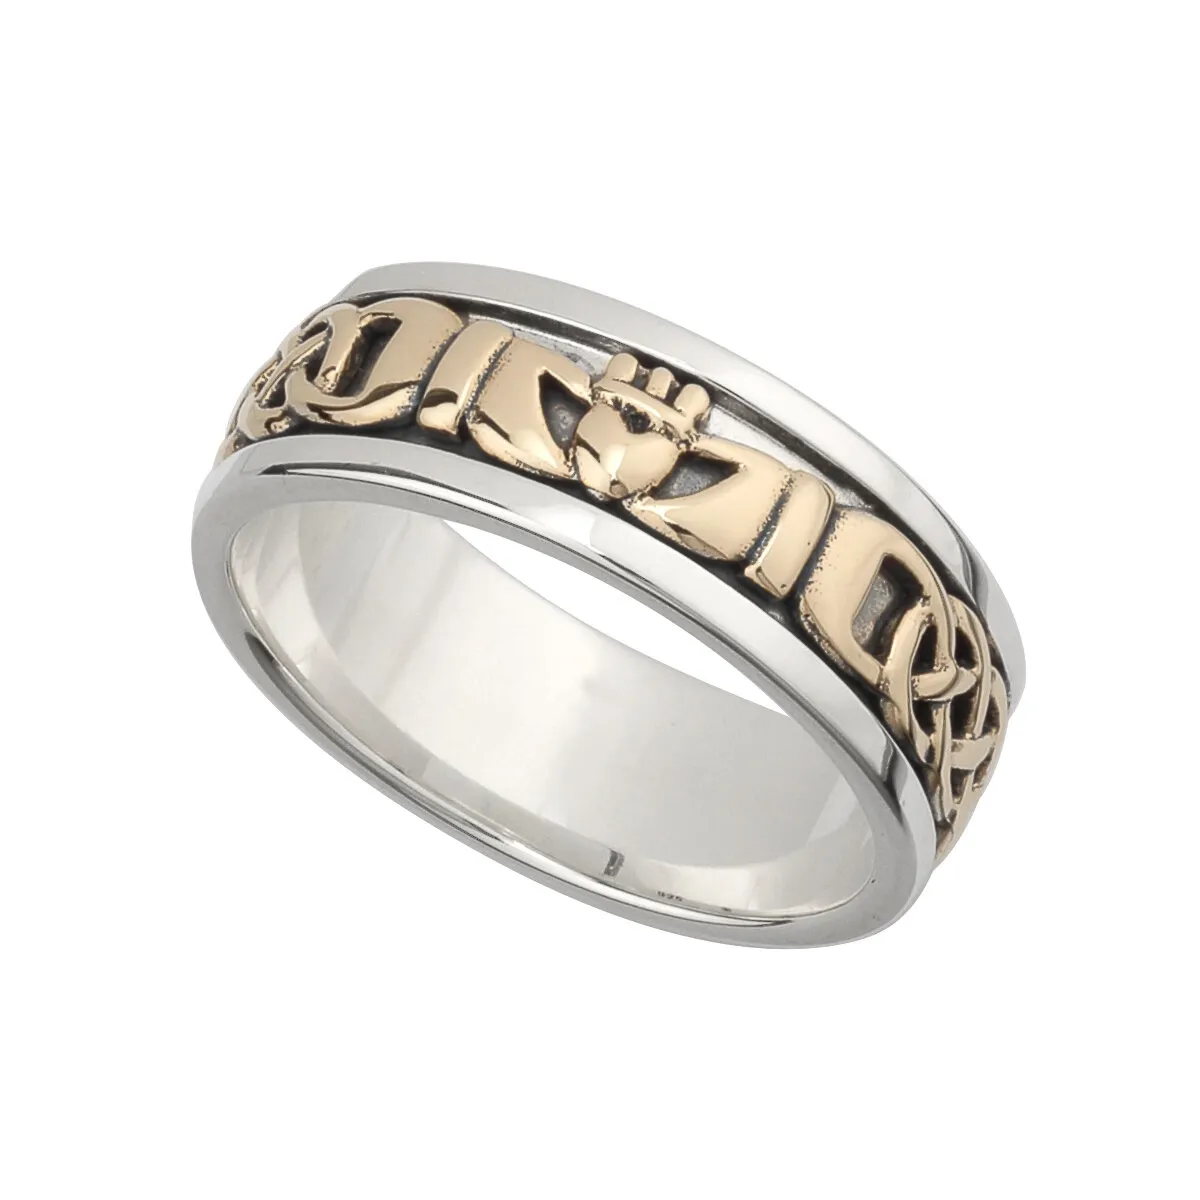 Sterling Silver And Gold Claddagh Band Ring For Him...